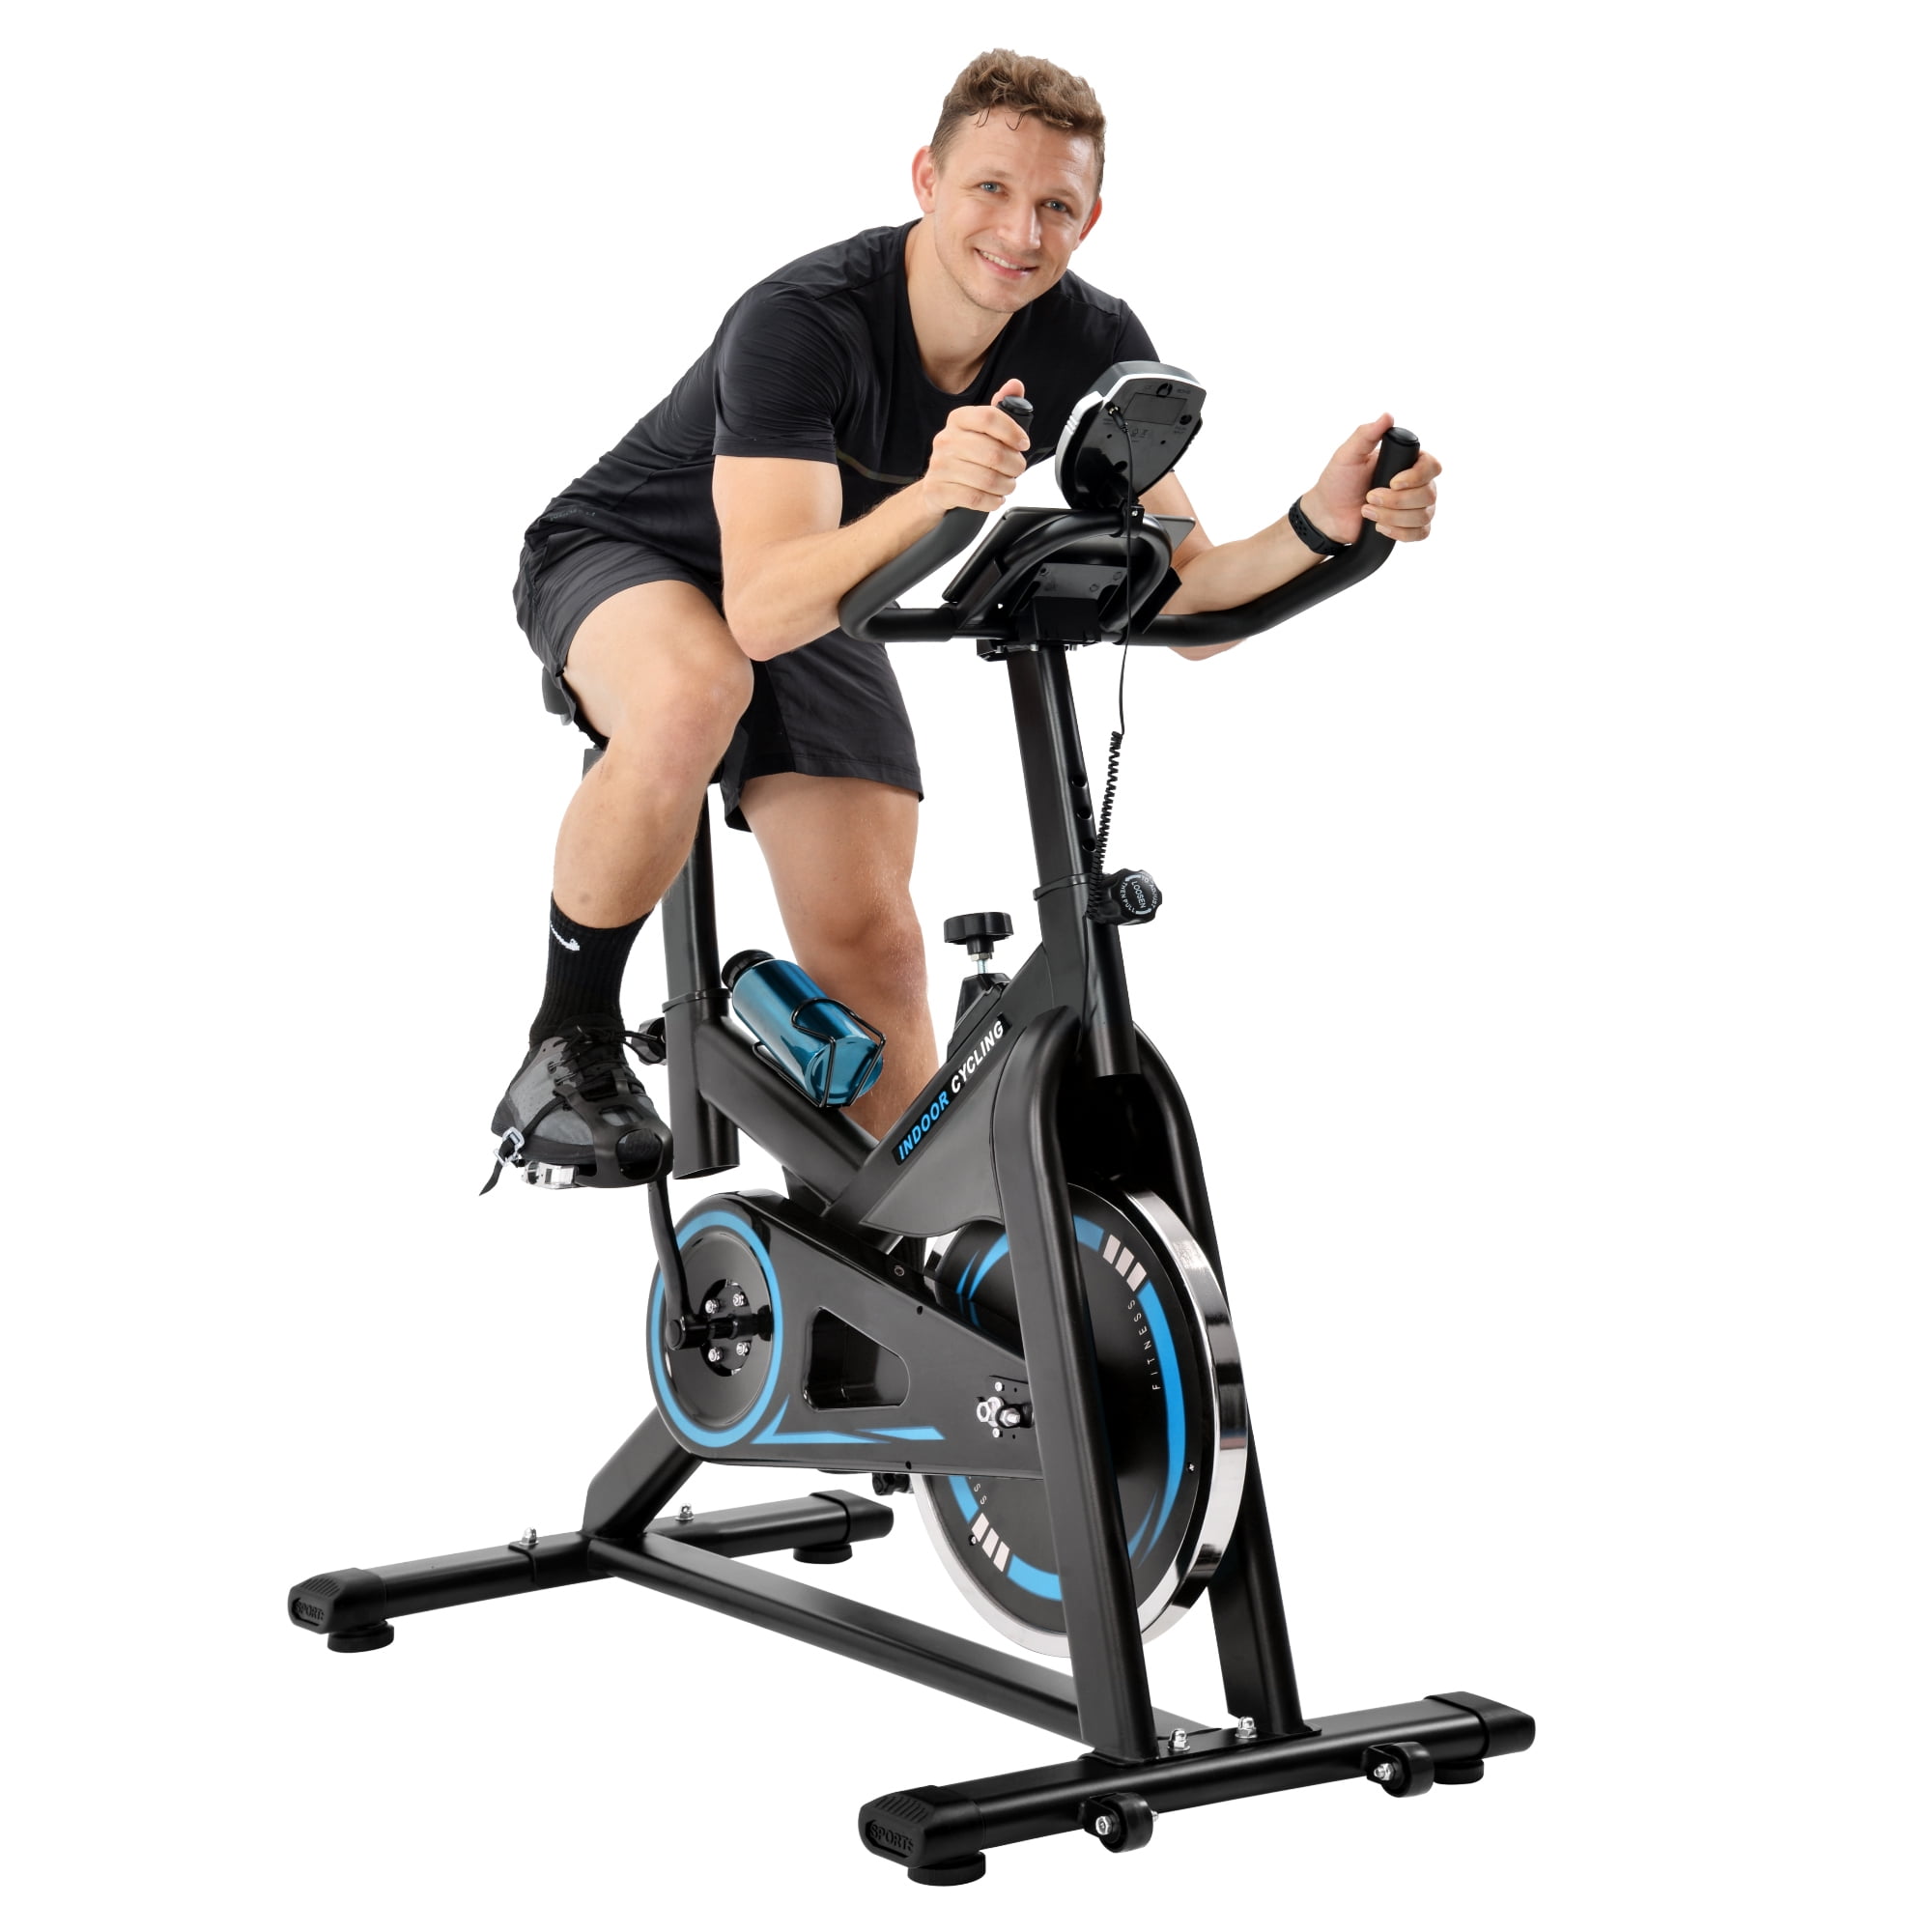 Details about   Pro Indoor Bicycle Cycling Fitness Gym Cardio Workout Stationary Exercise Bike 